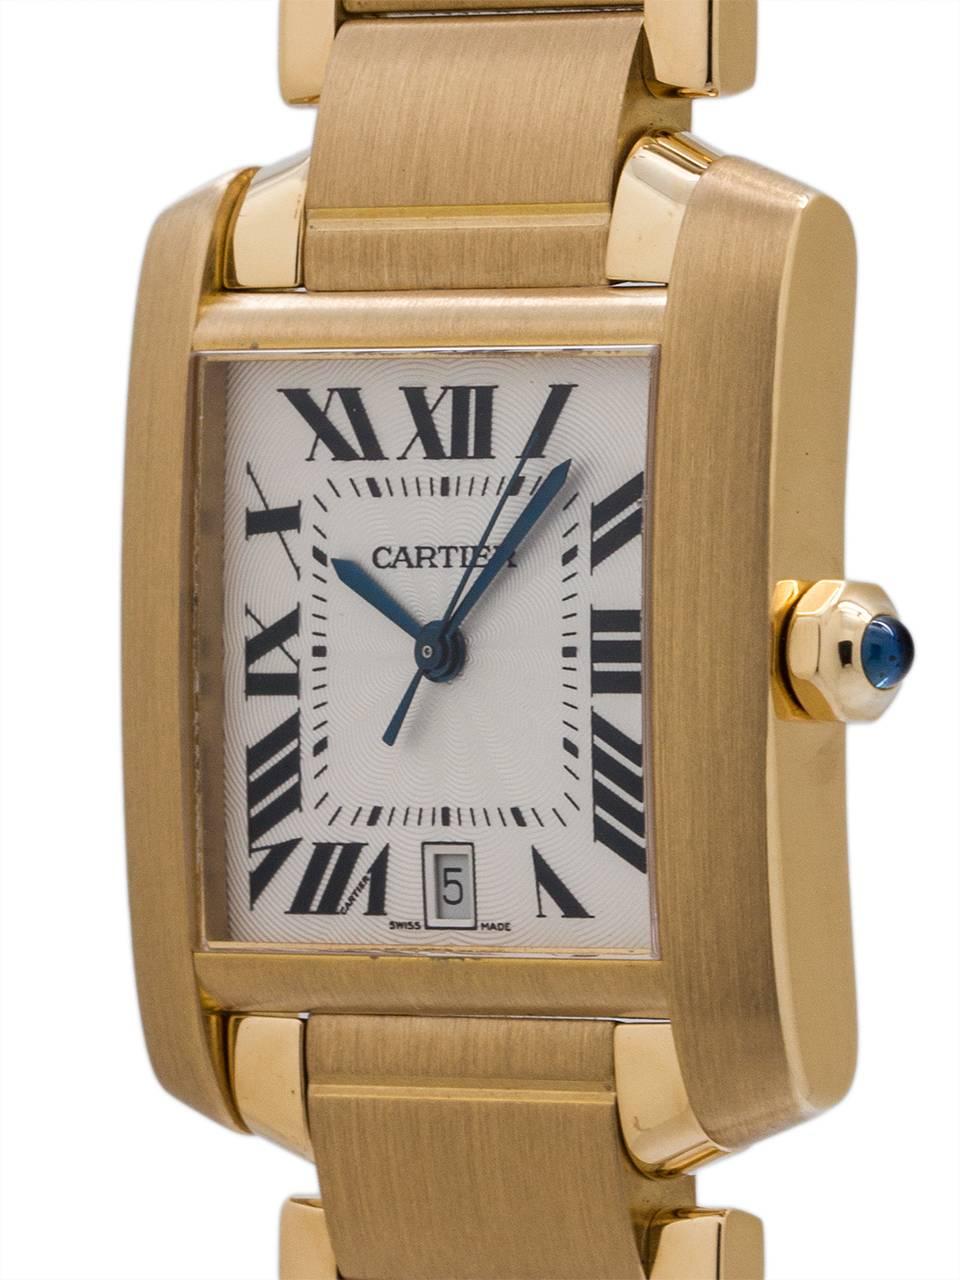 Cartier Tank Francaise 18K YG man’s full size automatic circa 2005. Measuring 28 x 42mm featuring guilloche textured silvered satin dial with black Roman figures, blued steel hands, and cabochon sapphire crown. Powered by self winding movement with